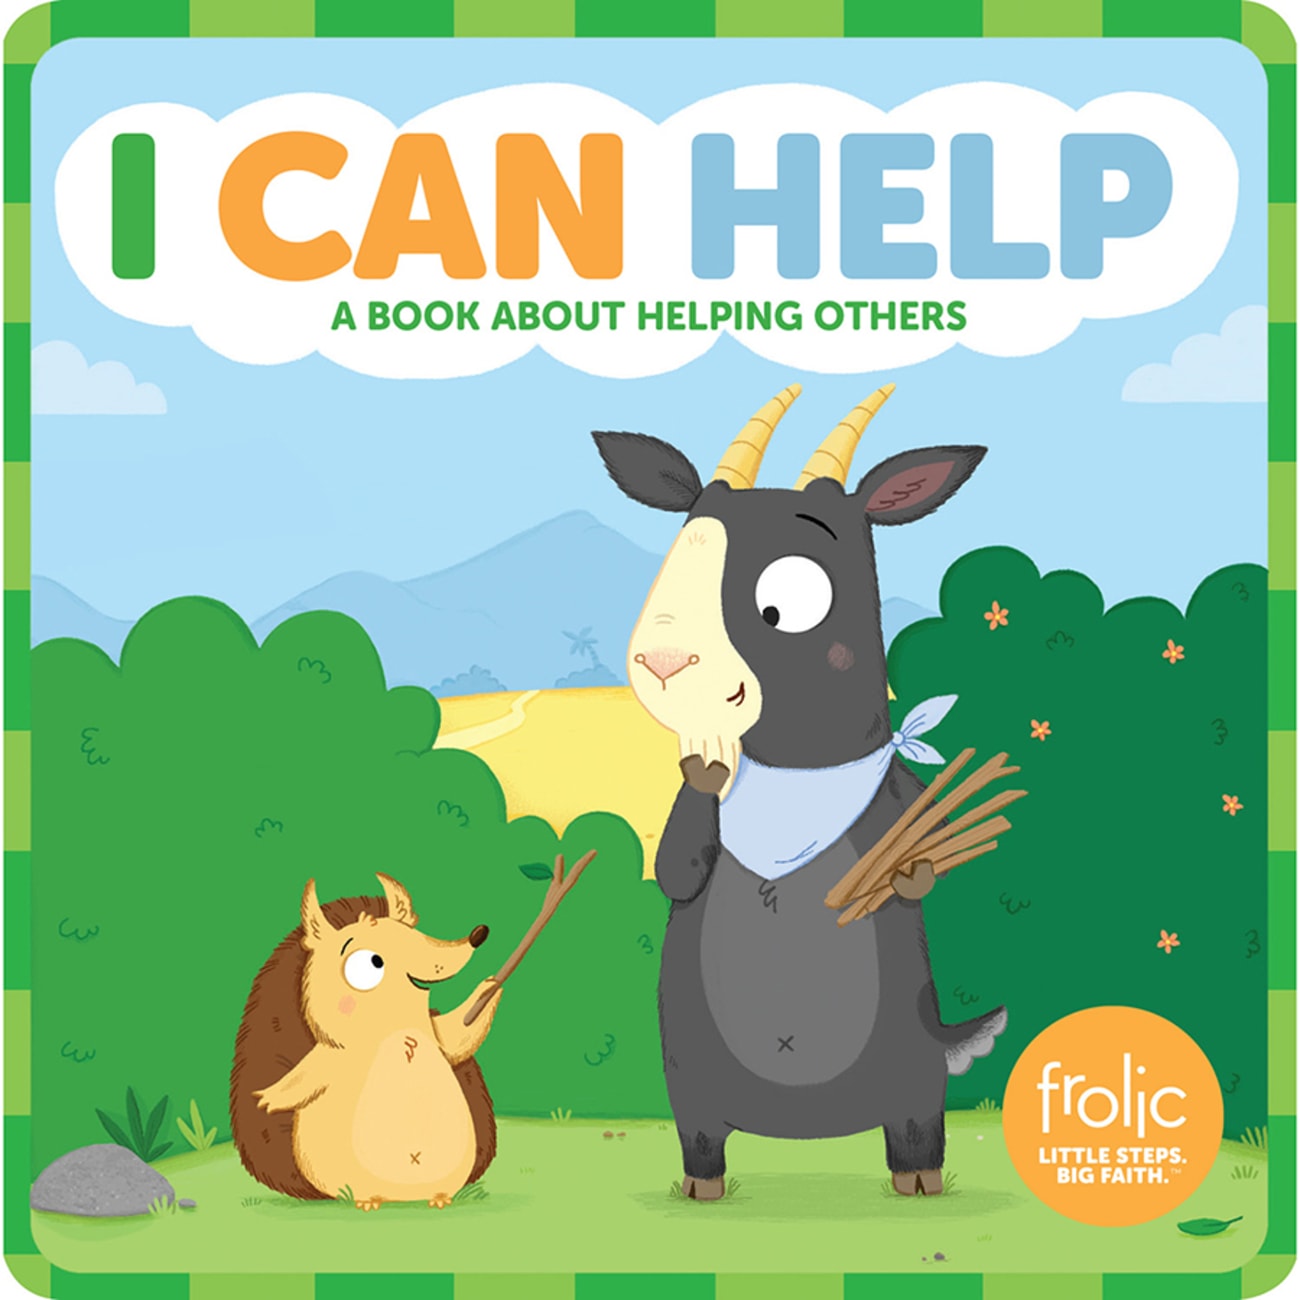 I Can Help: A Book About Helping Others (Frolic Series) Board Book